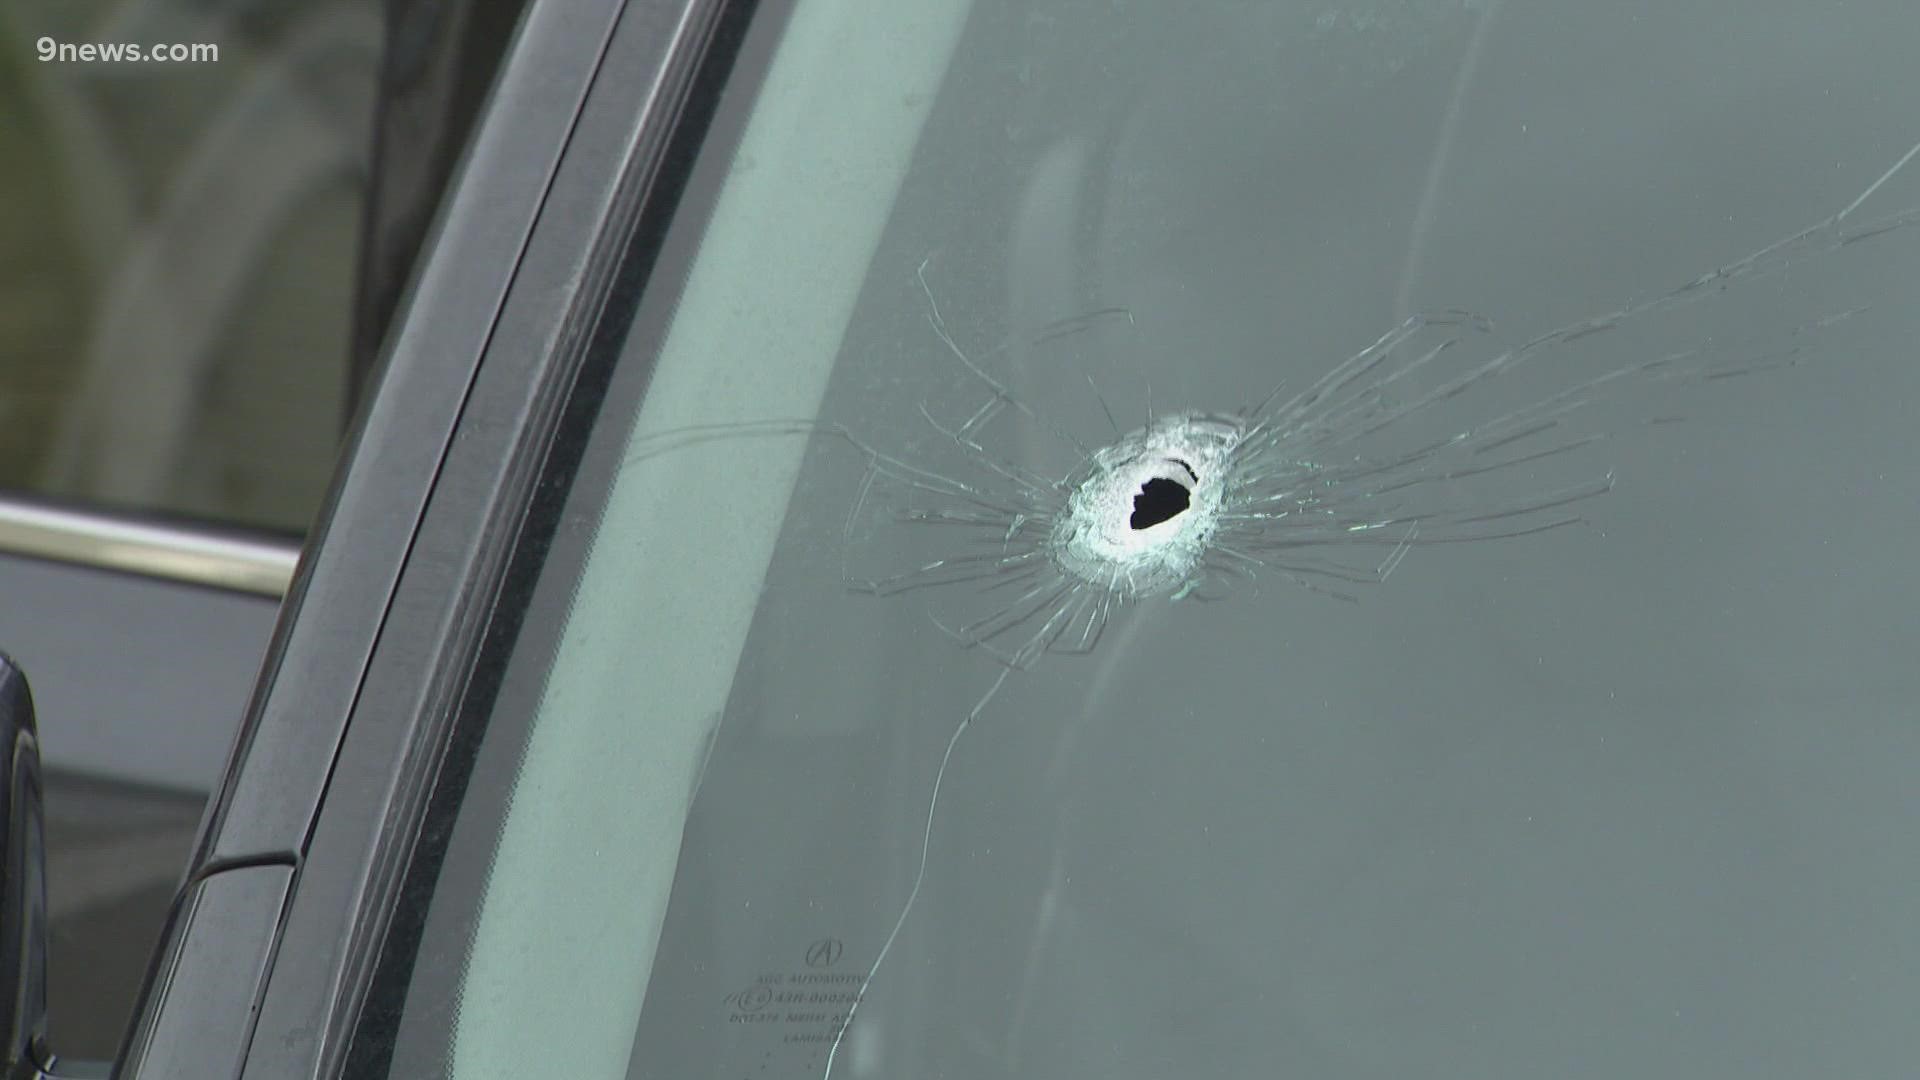 The bullet narrowly missed a child sitting in the car.